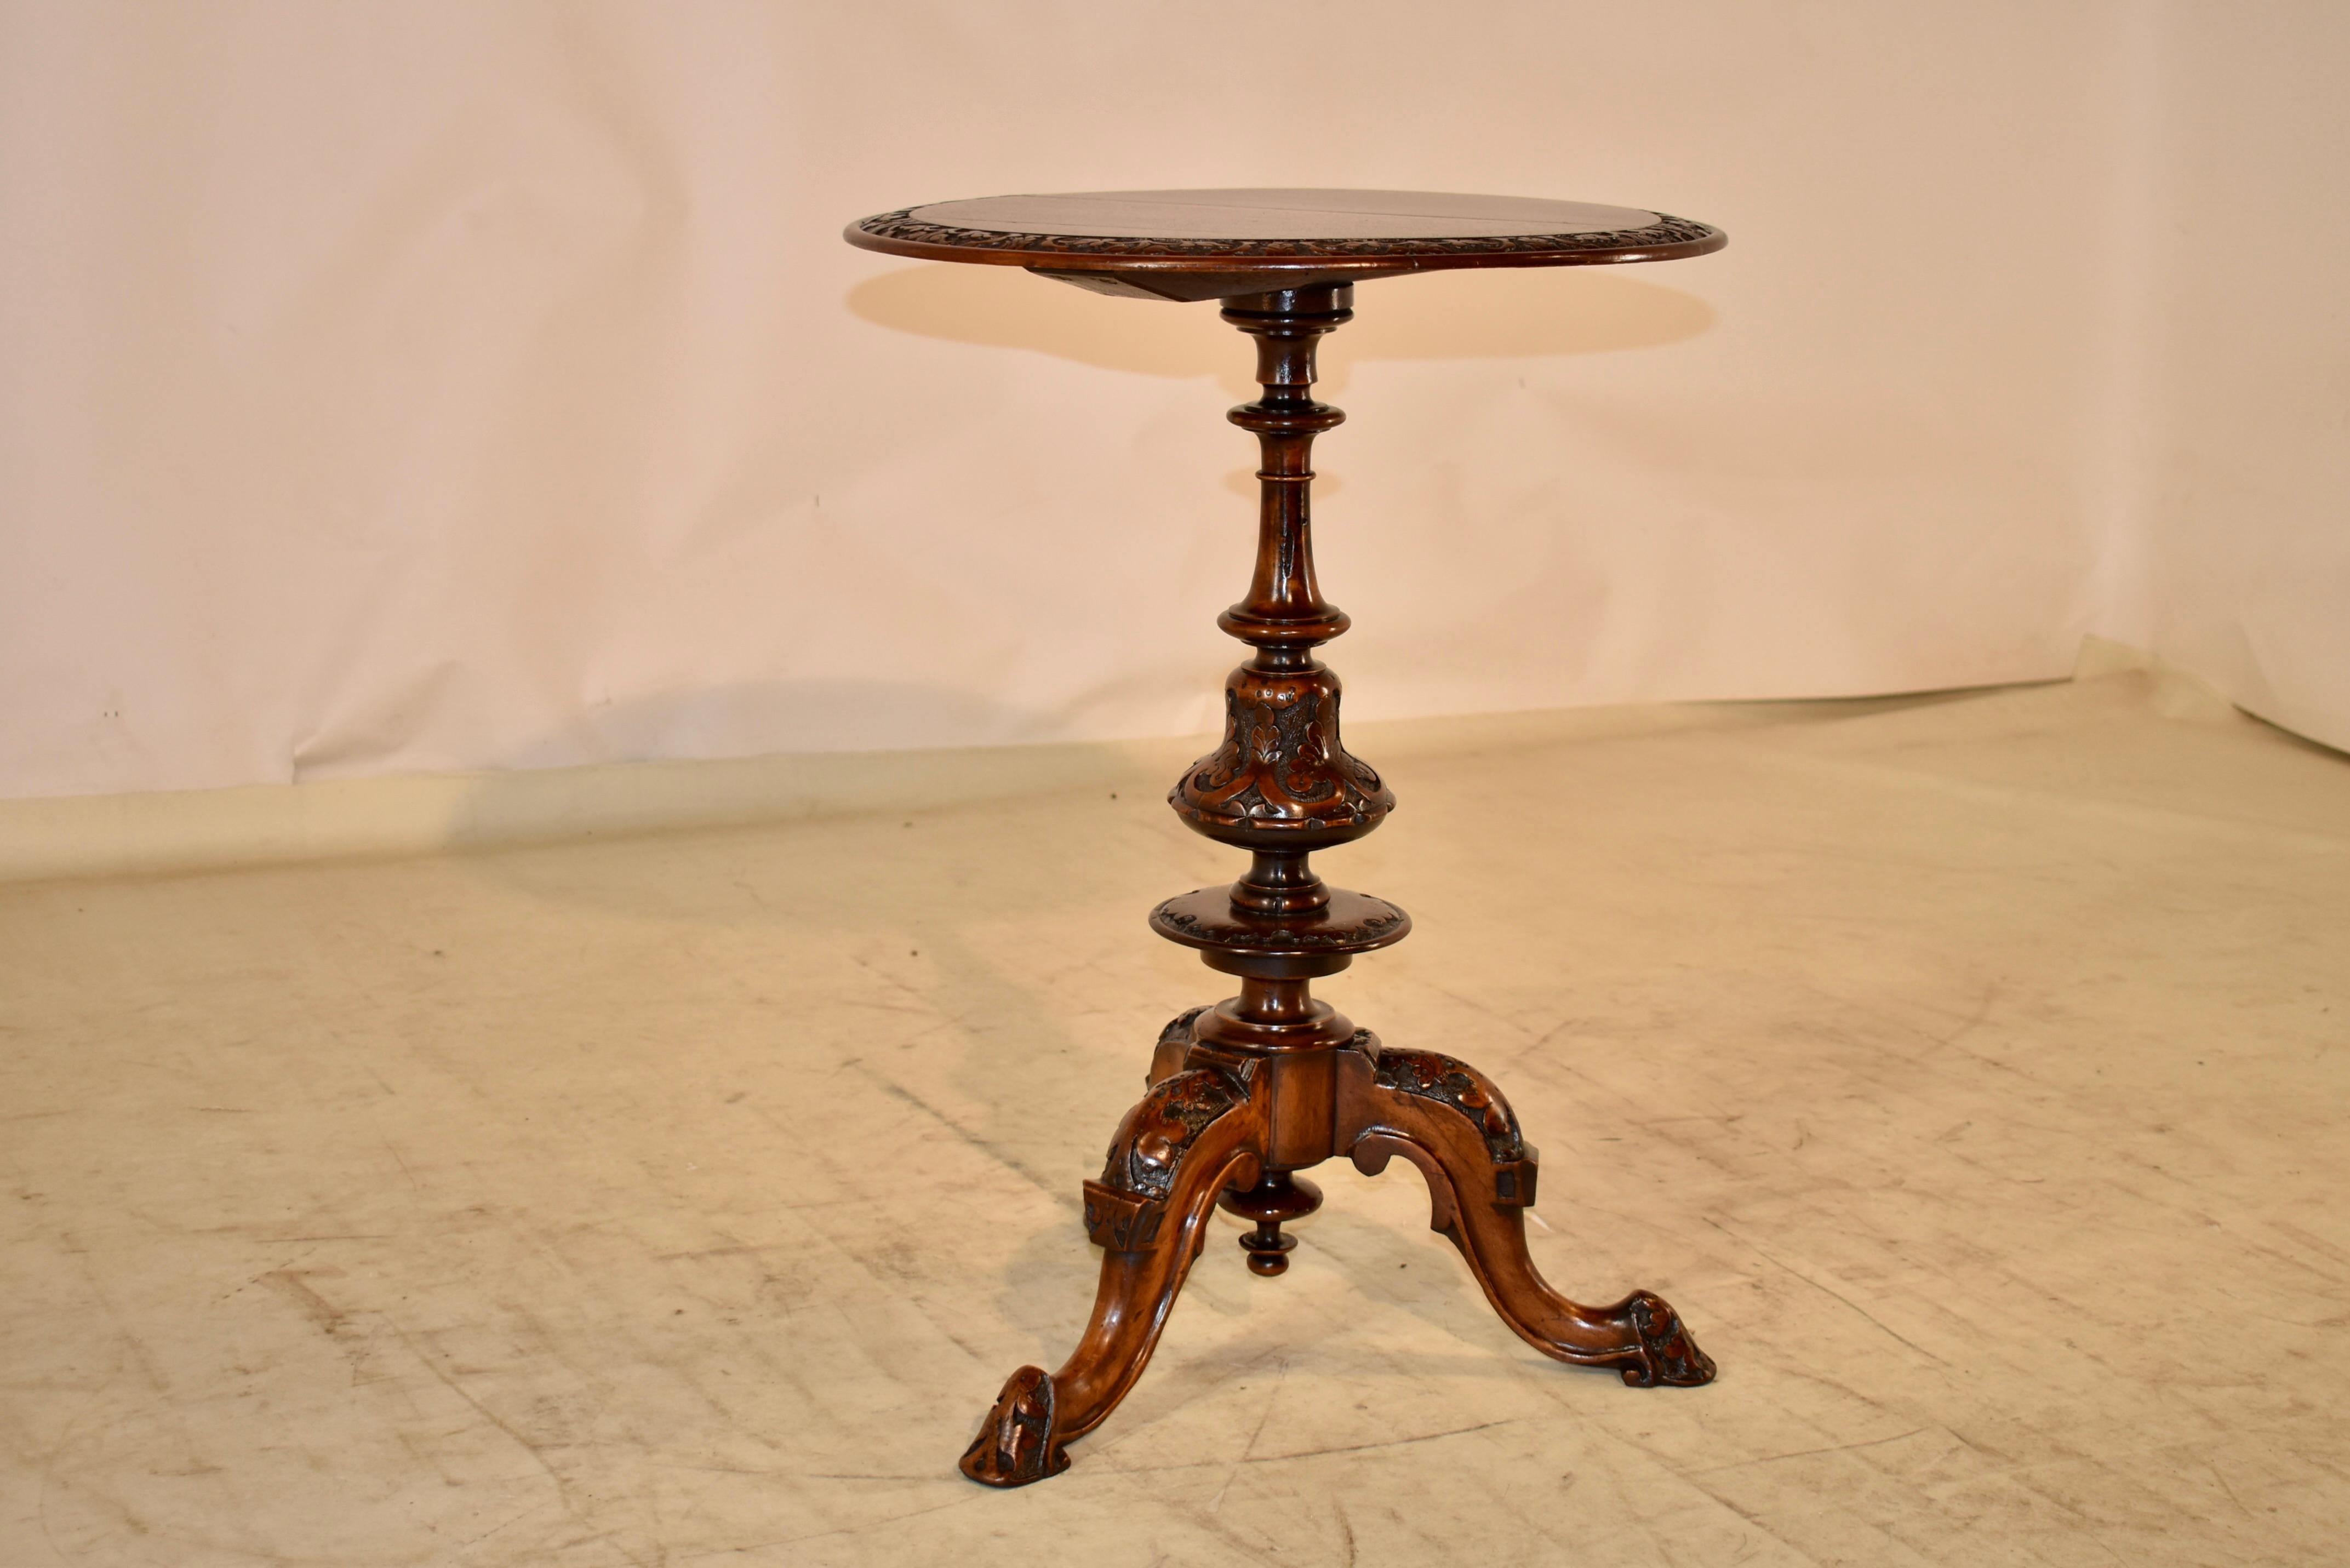 Early 19th century mahogany side table from England. The top has a banded edge which is hand-carved decorated and beveled. The top is supported on a hand turned and hand carved decorated pedestal, ending in a tripod base. The base has three